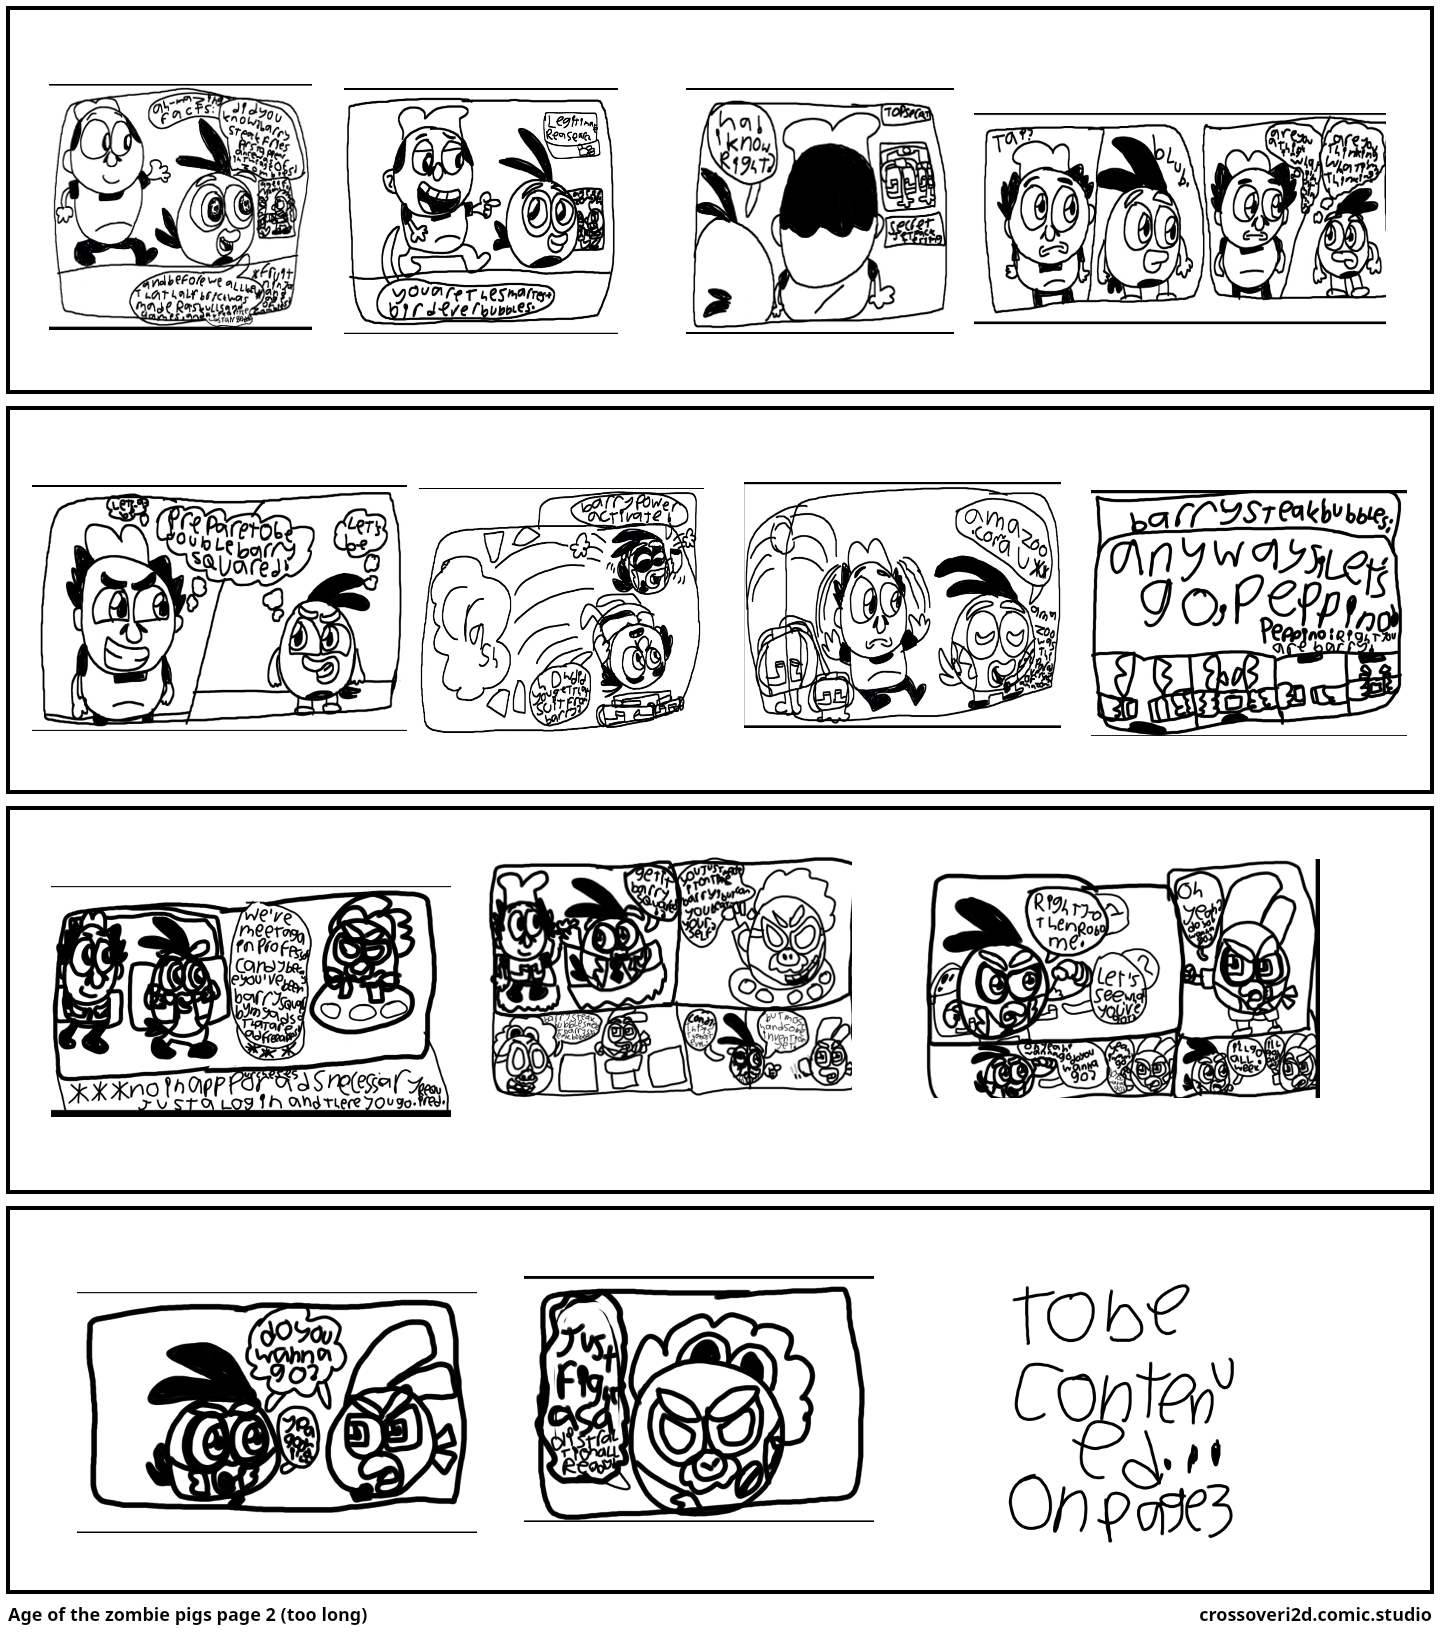 Age of the zombie pigs page 2 (too long)